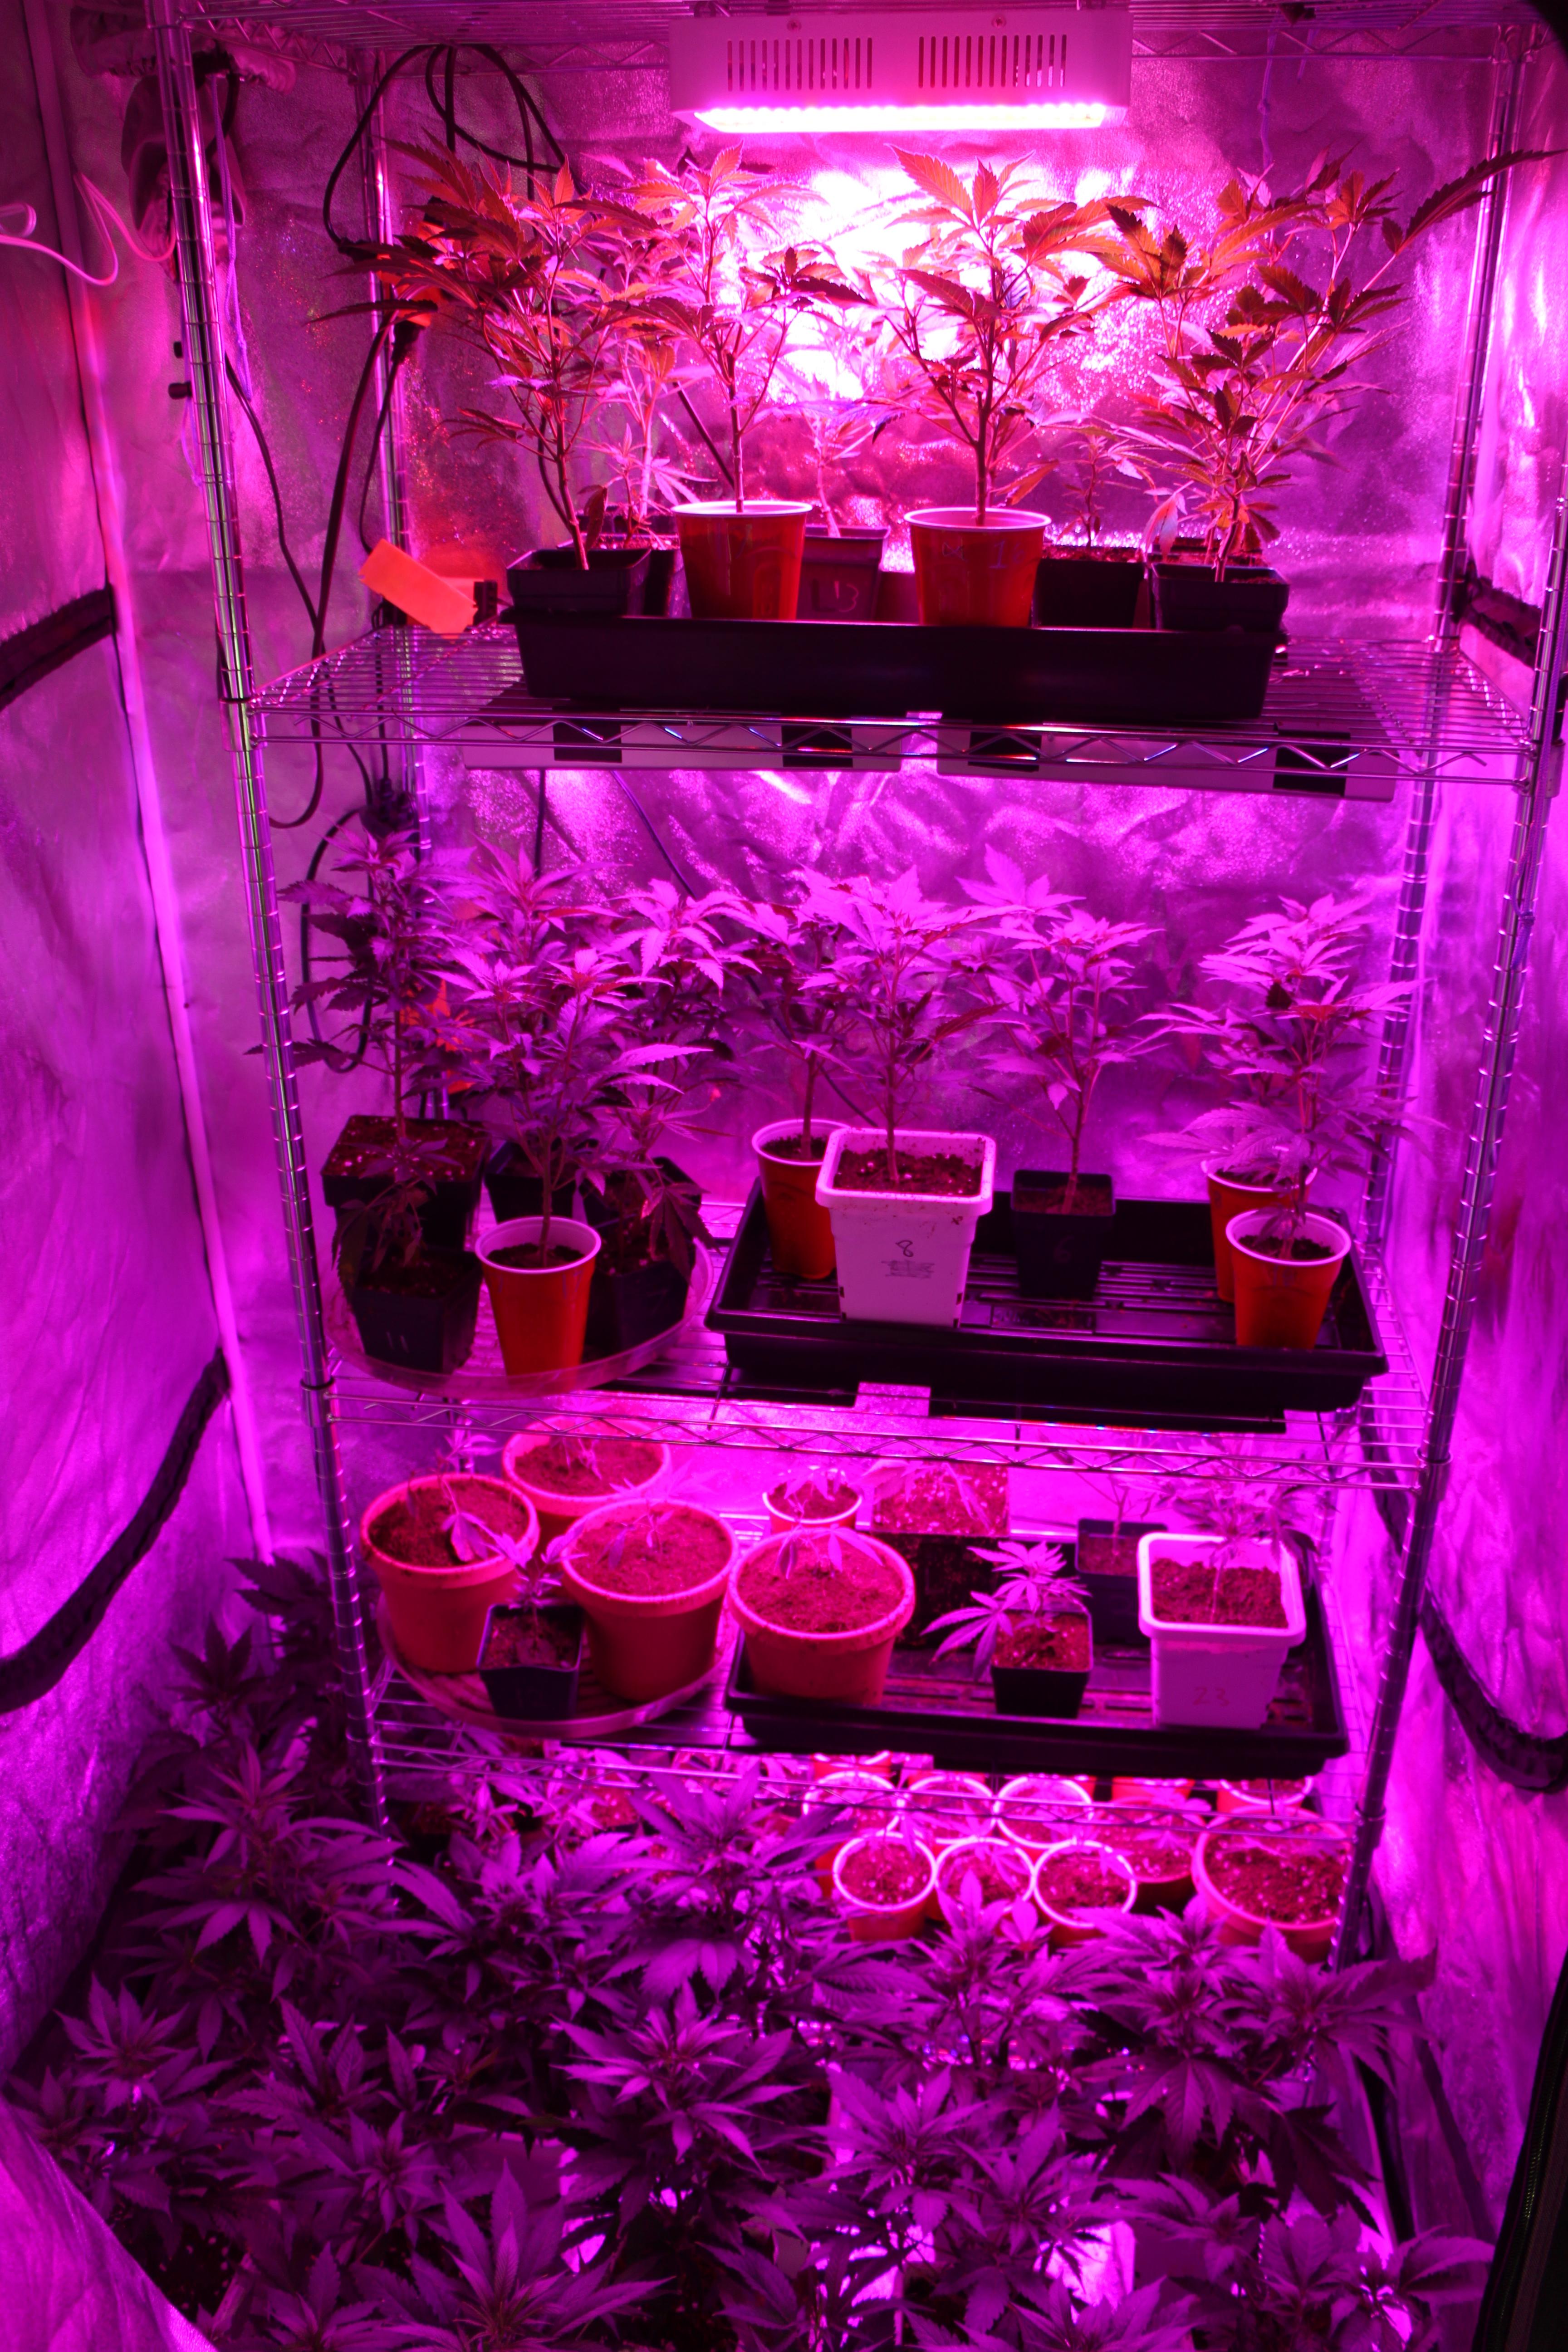 Pics of my 4x4 tent with adjustable shelves and thin LED panels | Rollitup